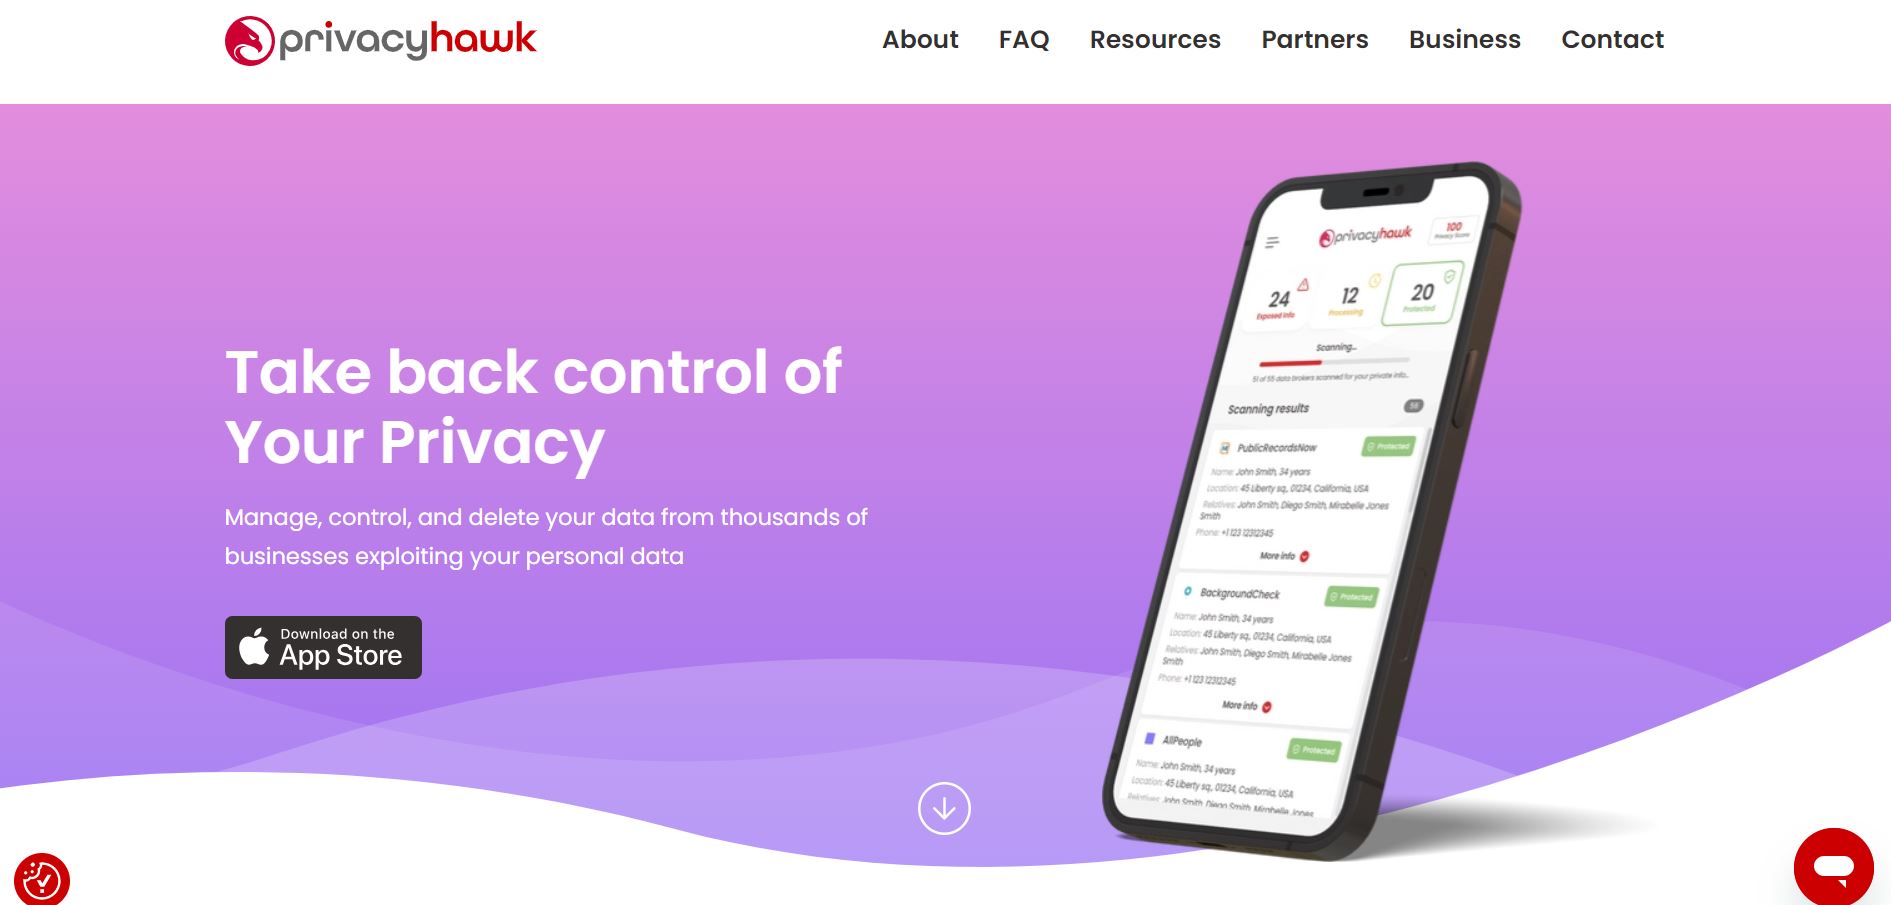 PrivacyHawk is a groundbreaking startup that has raised an impressive $2.7 million in funding.